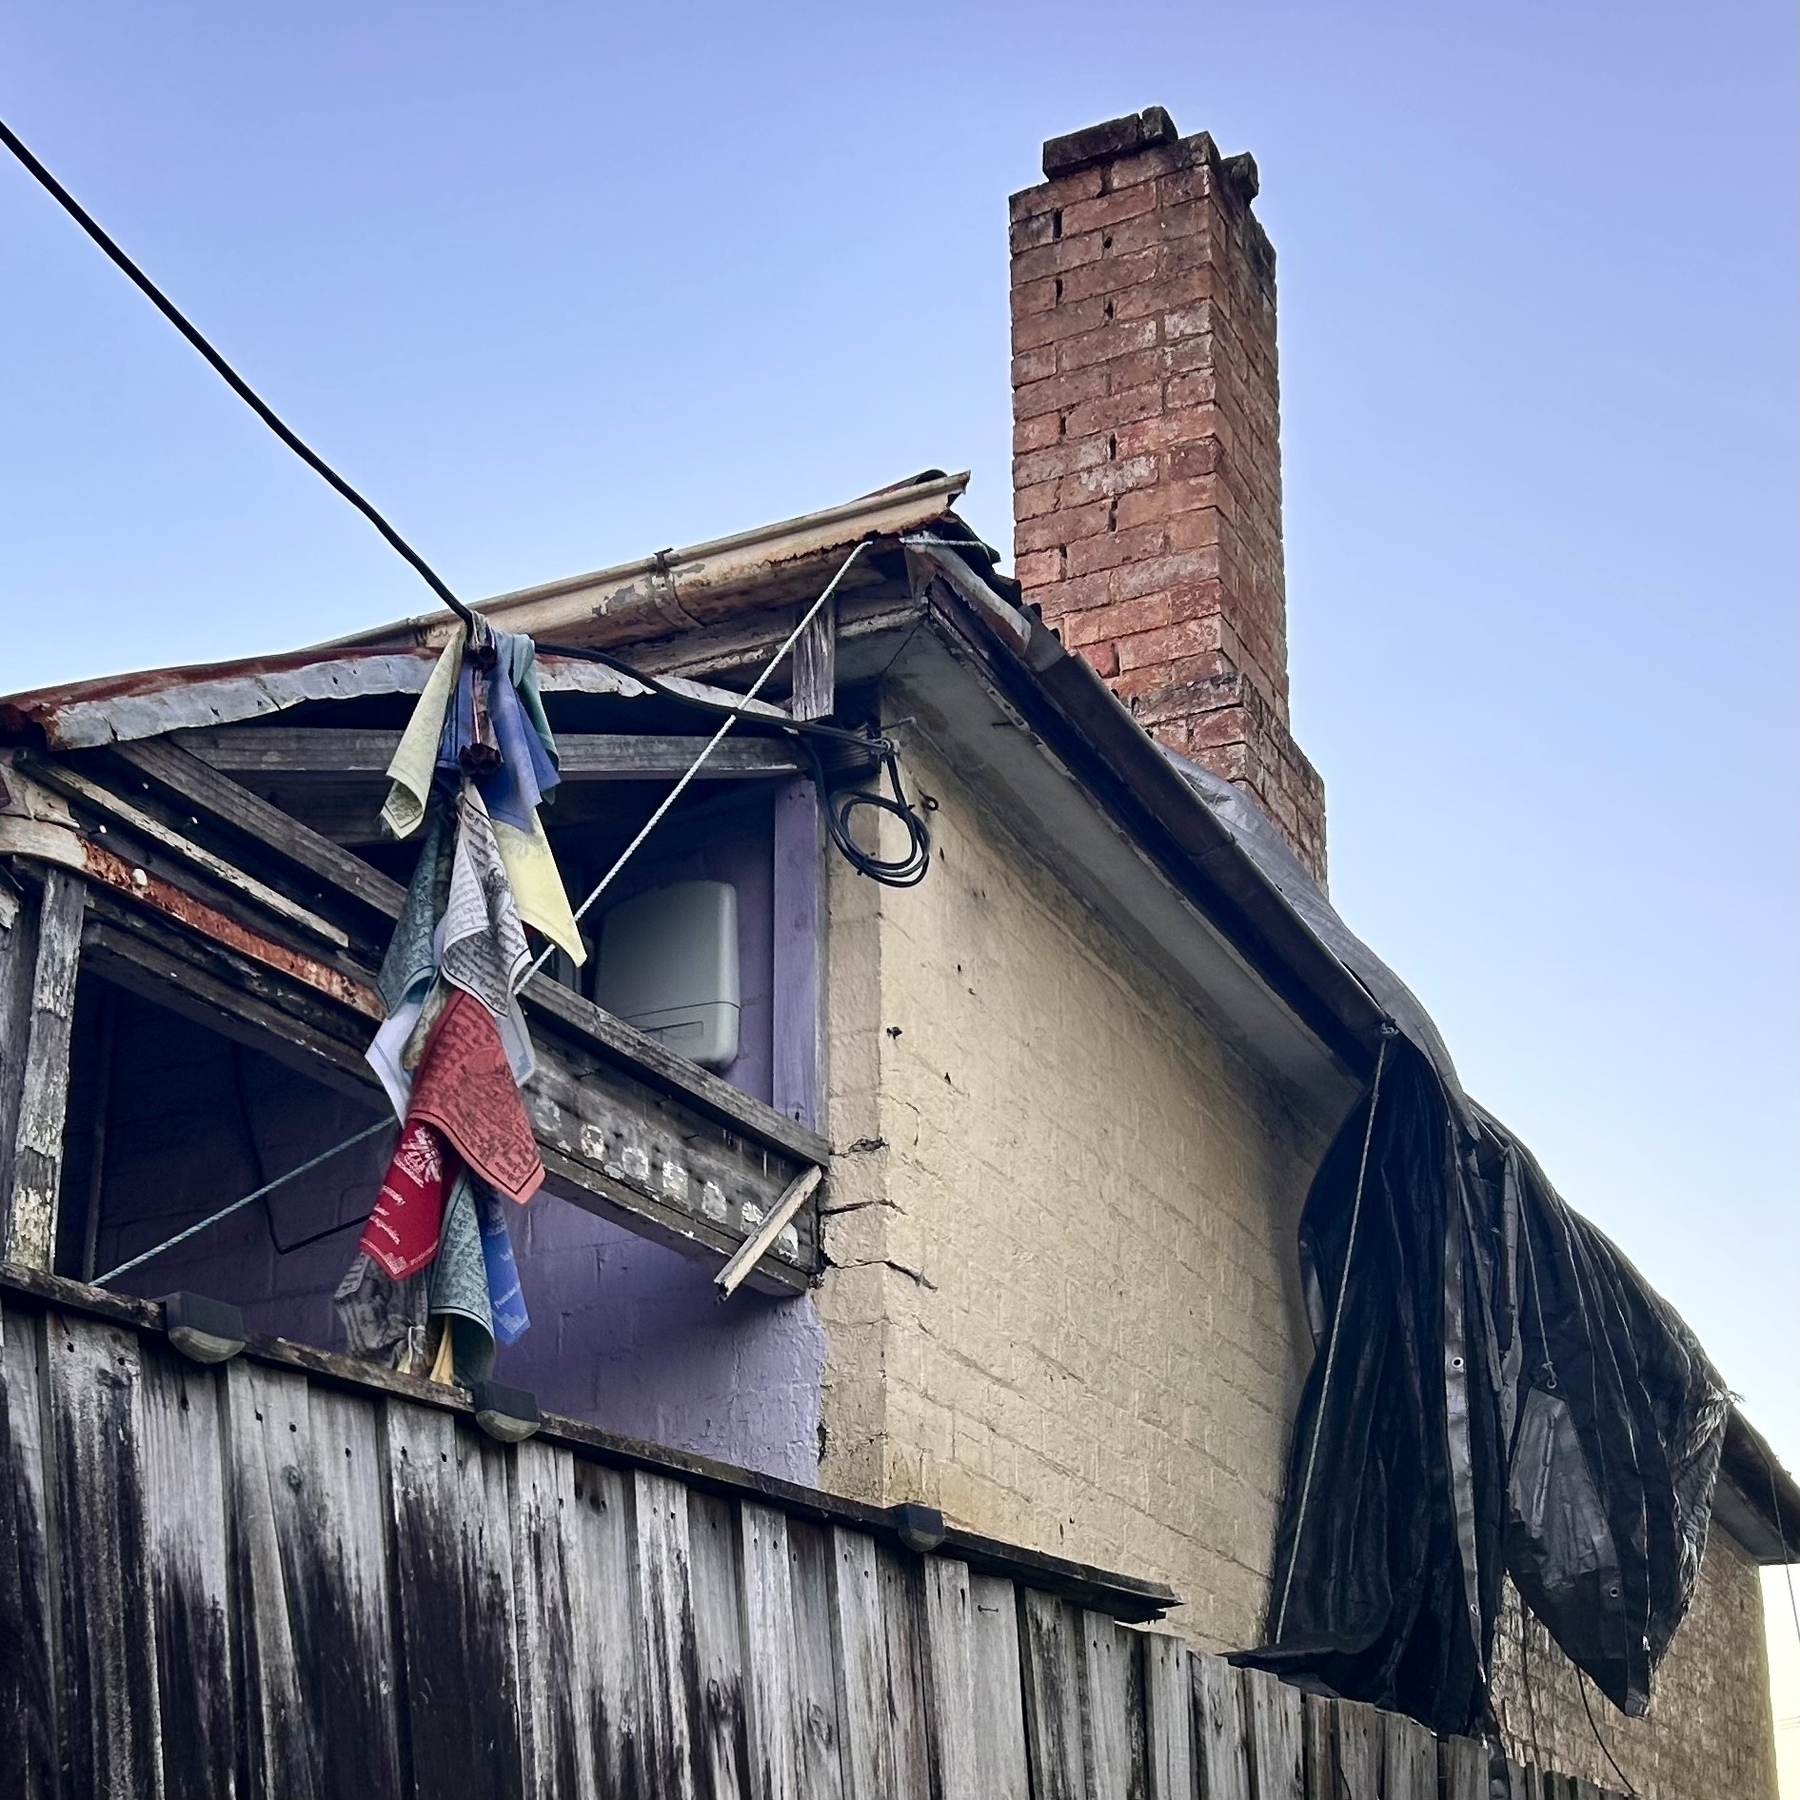 An old house with a tarpaulin hanging off the roof. A faded string of prayer flags is hanging from what I think is the TV cable connection